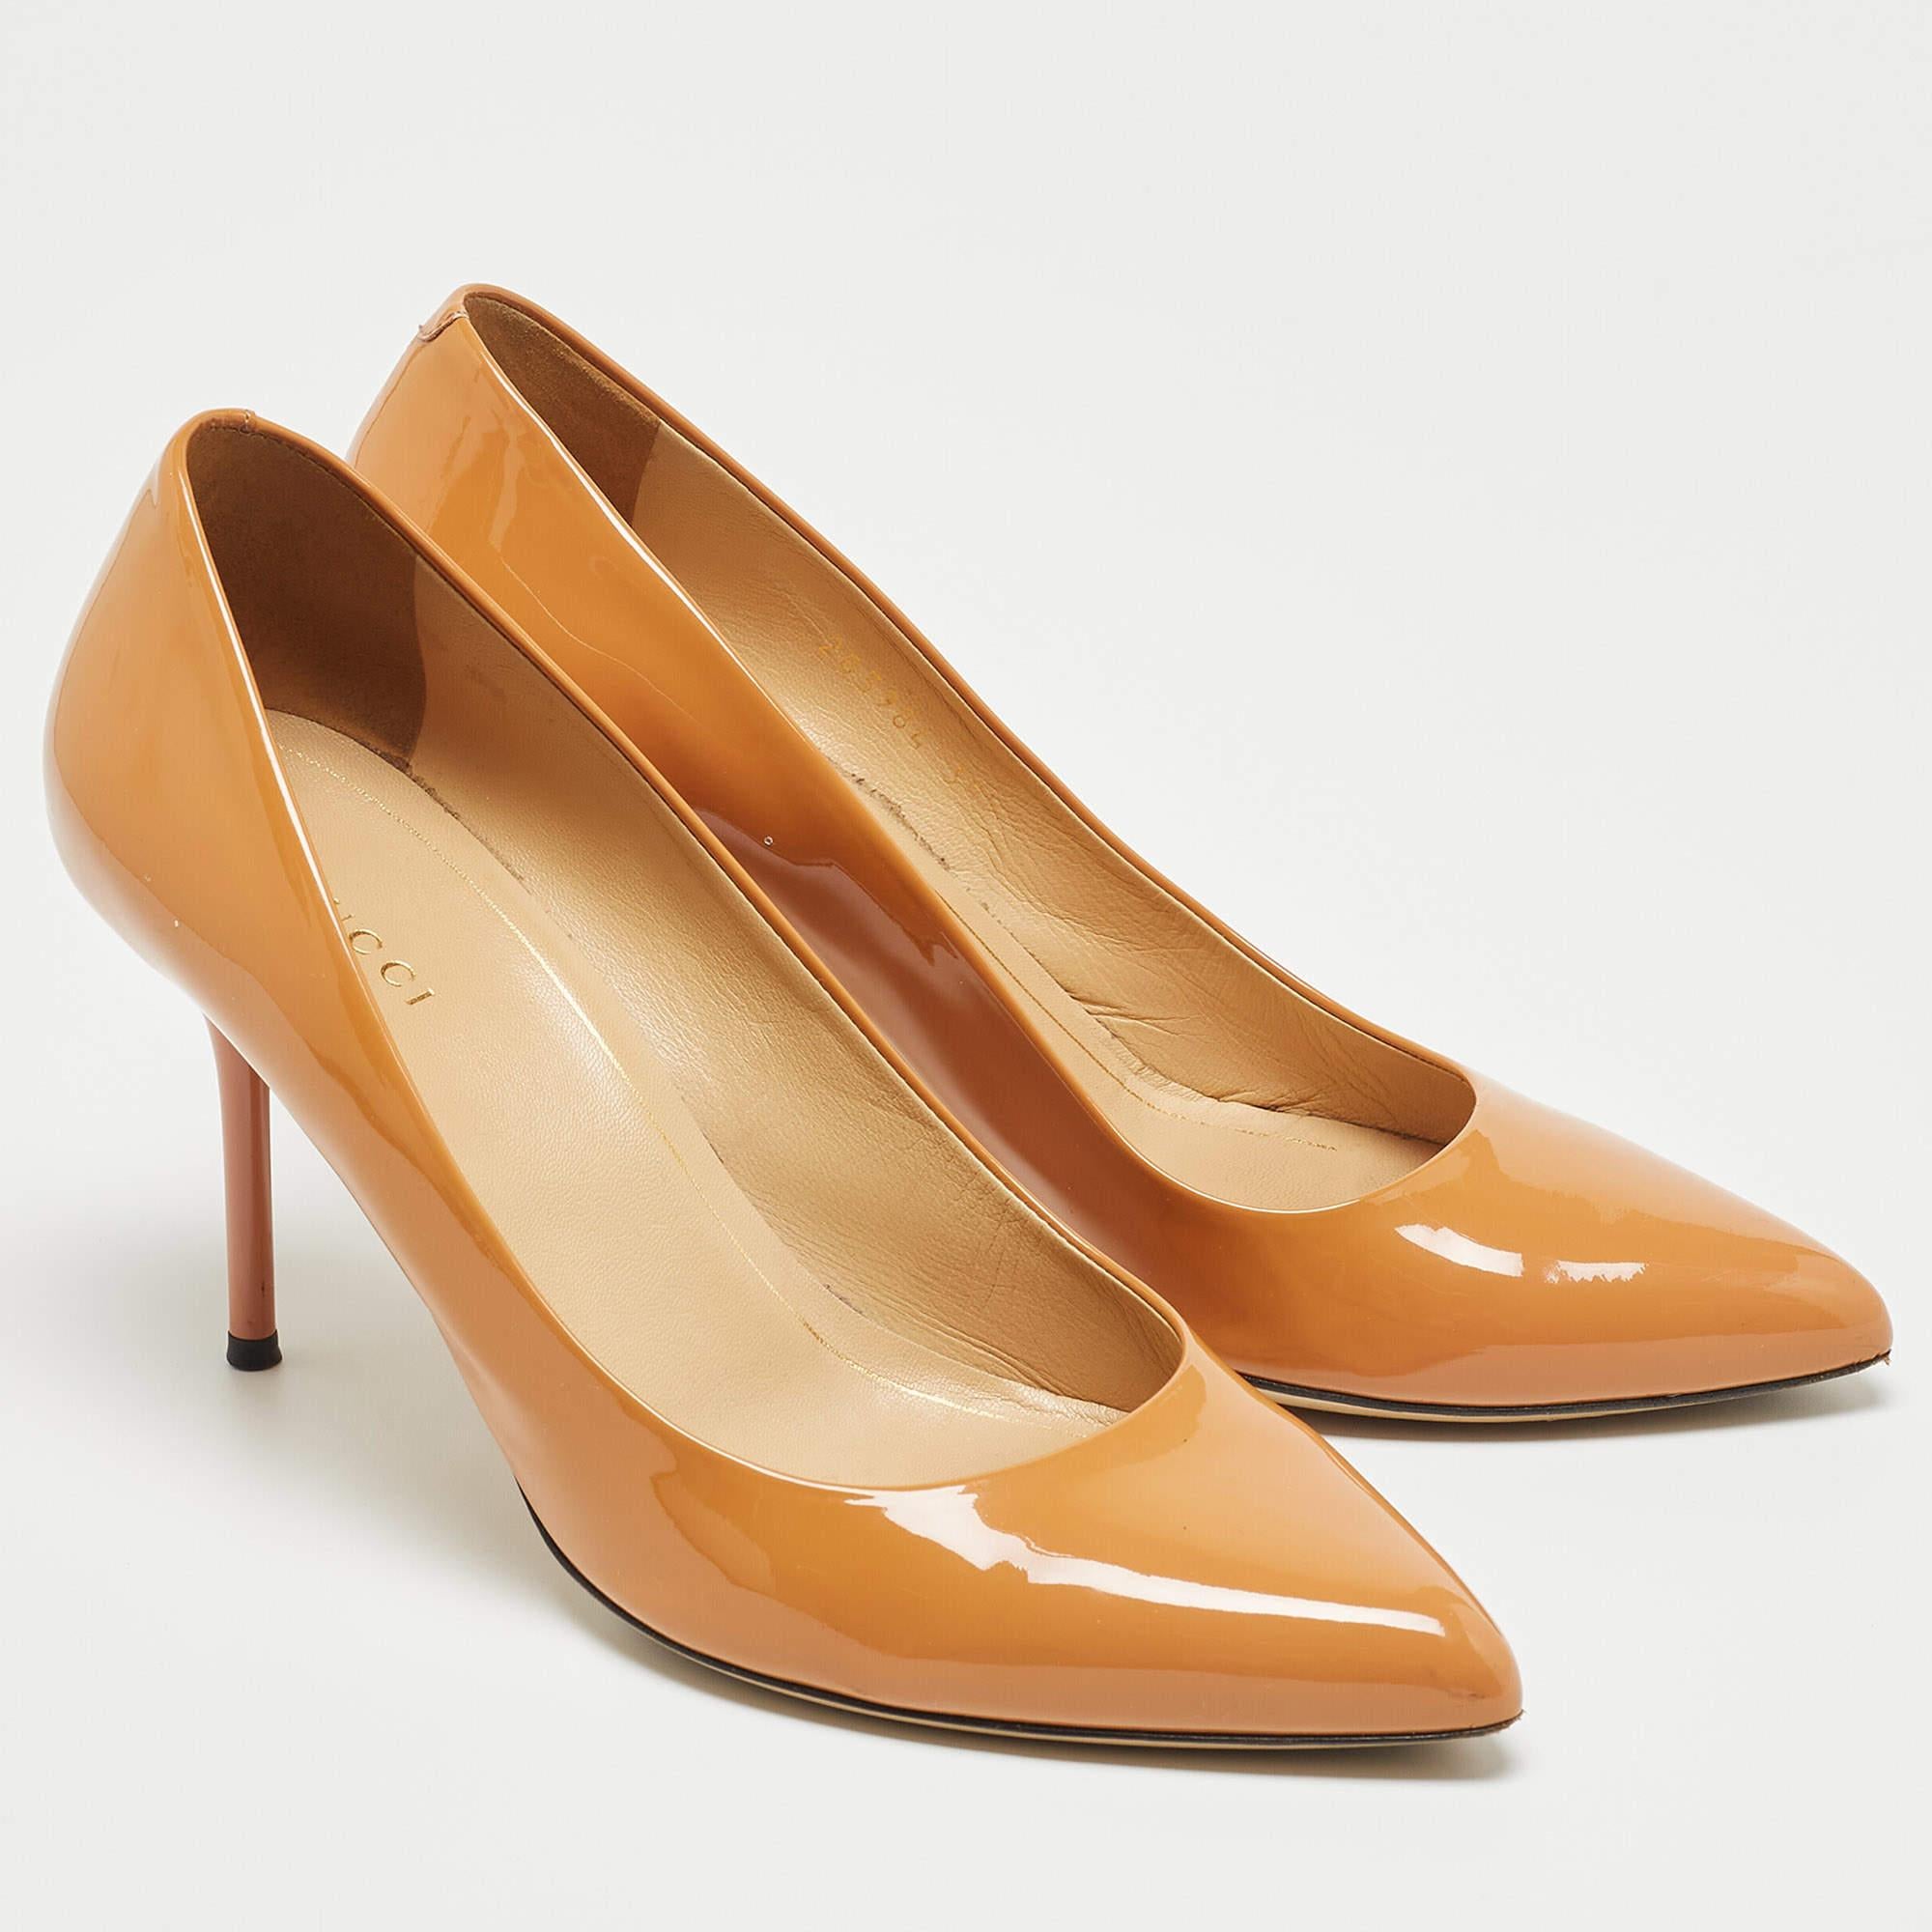 Gucci Brown Patent Leather Pointed Top Pumps Size 39.5 In Good Condition For Sale In Dubai, Al Qouz 2